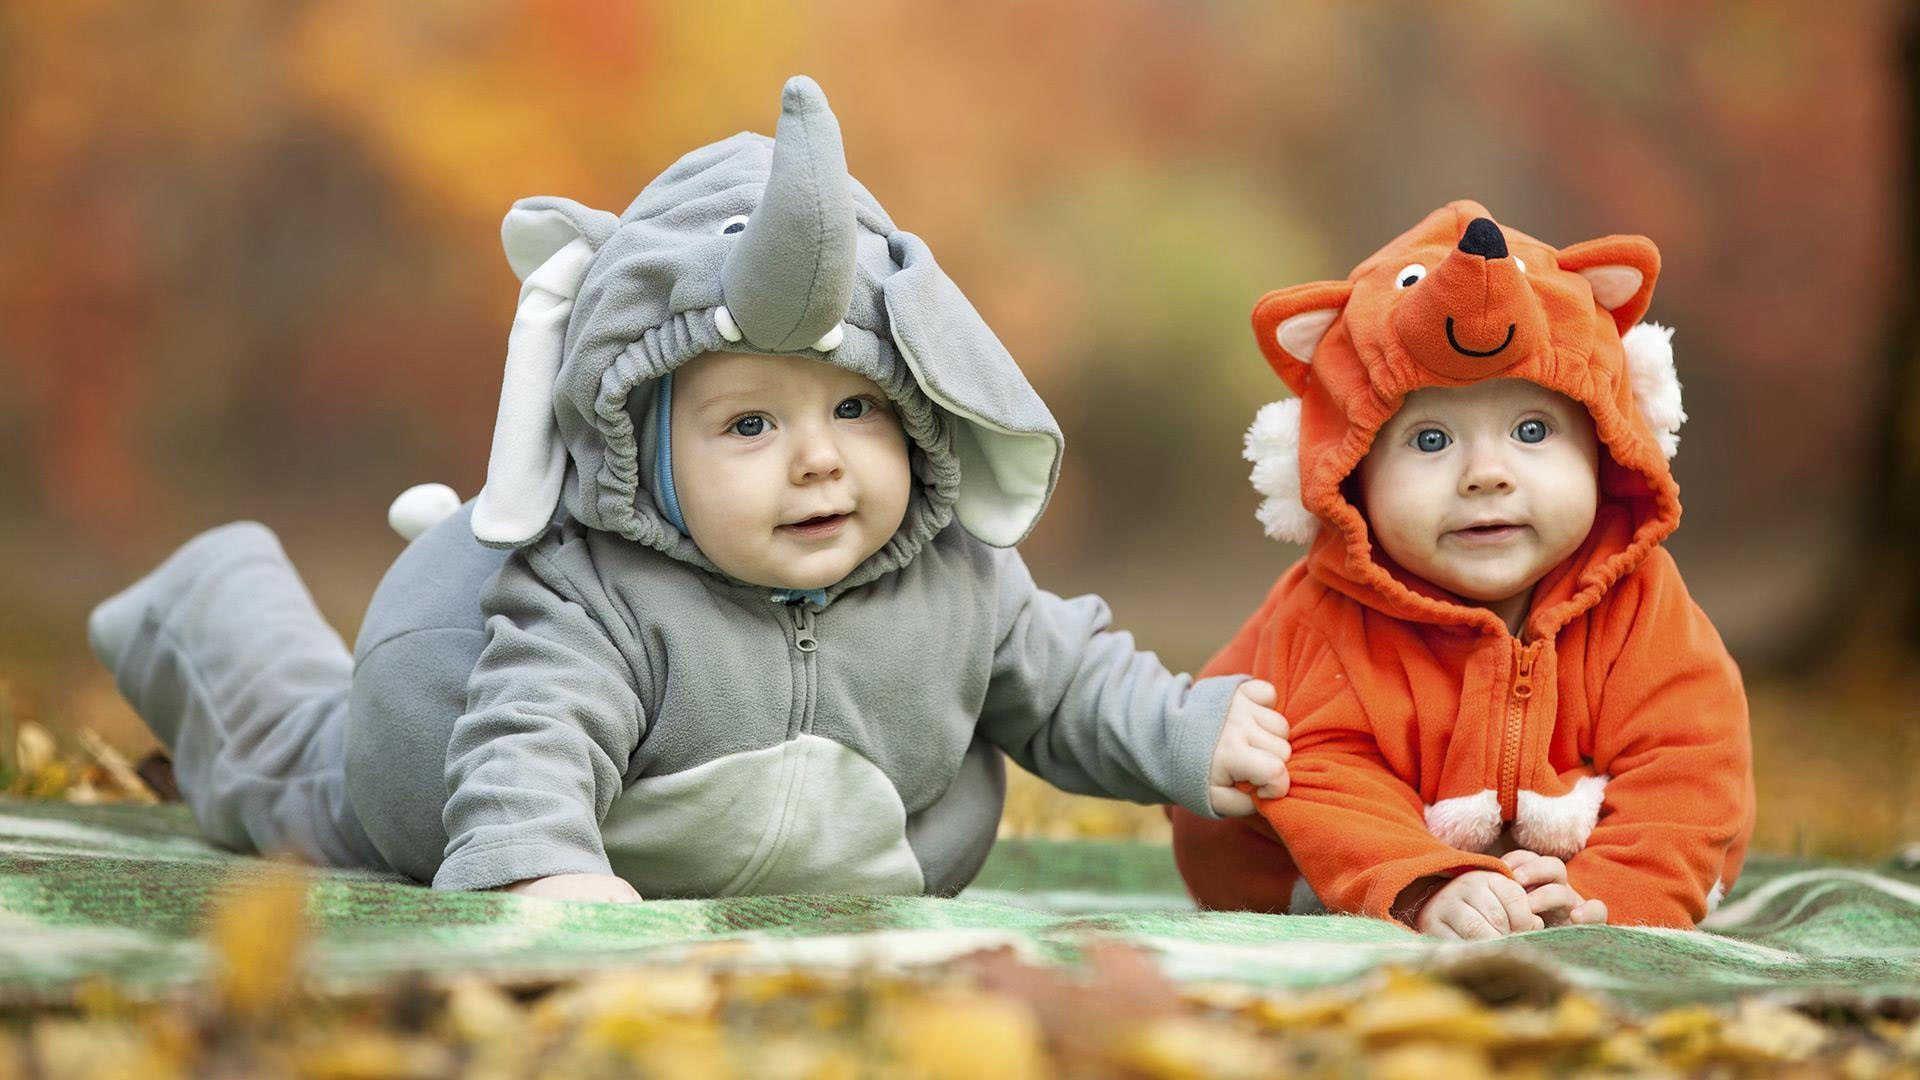 Funny Baby Costume Wallpaper. Download free cute baby wallpaper